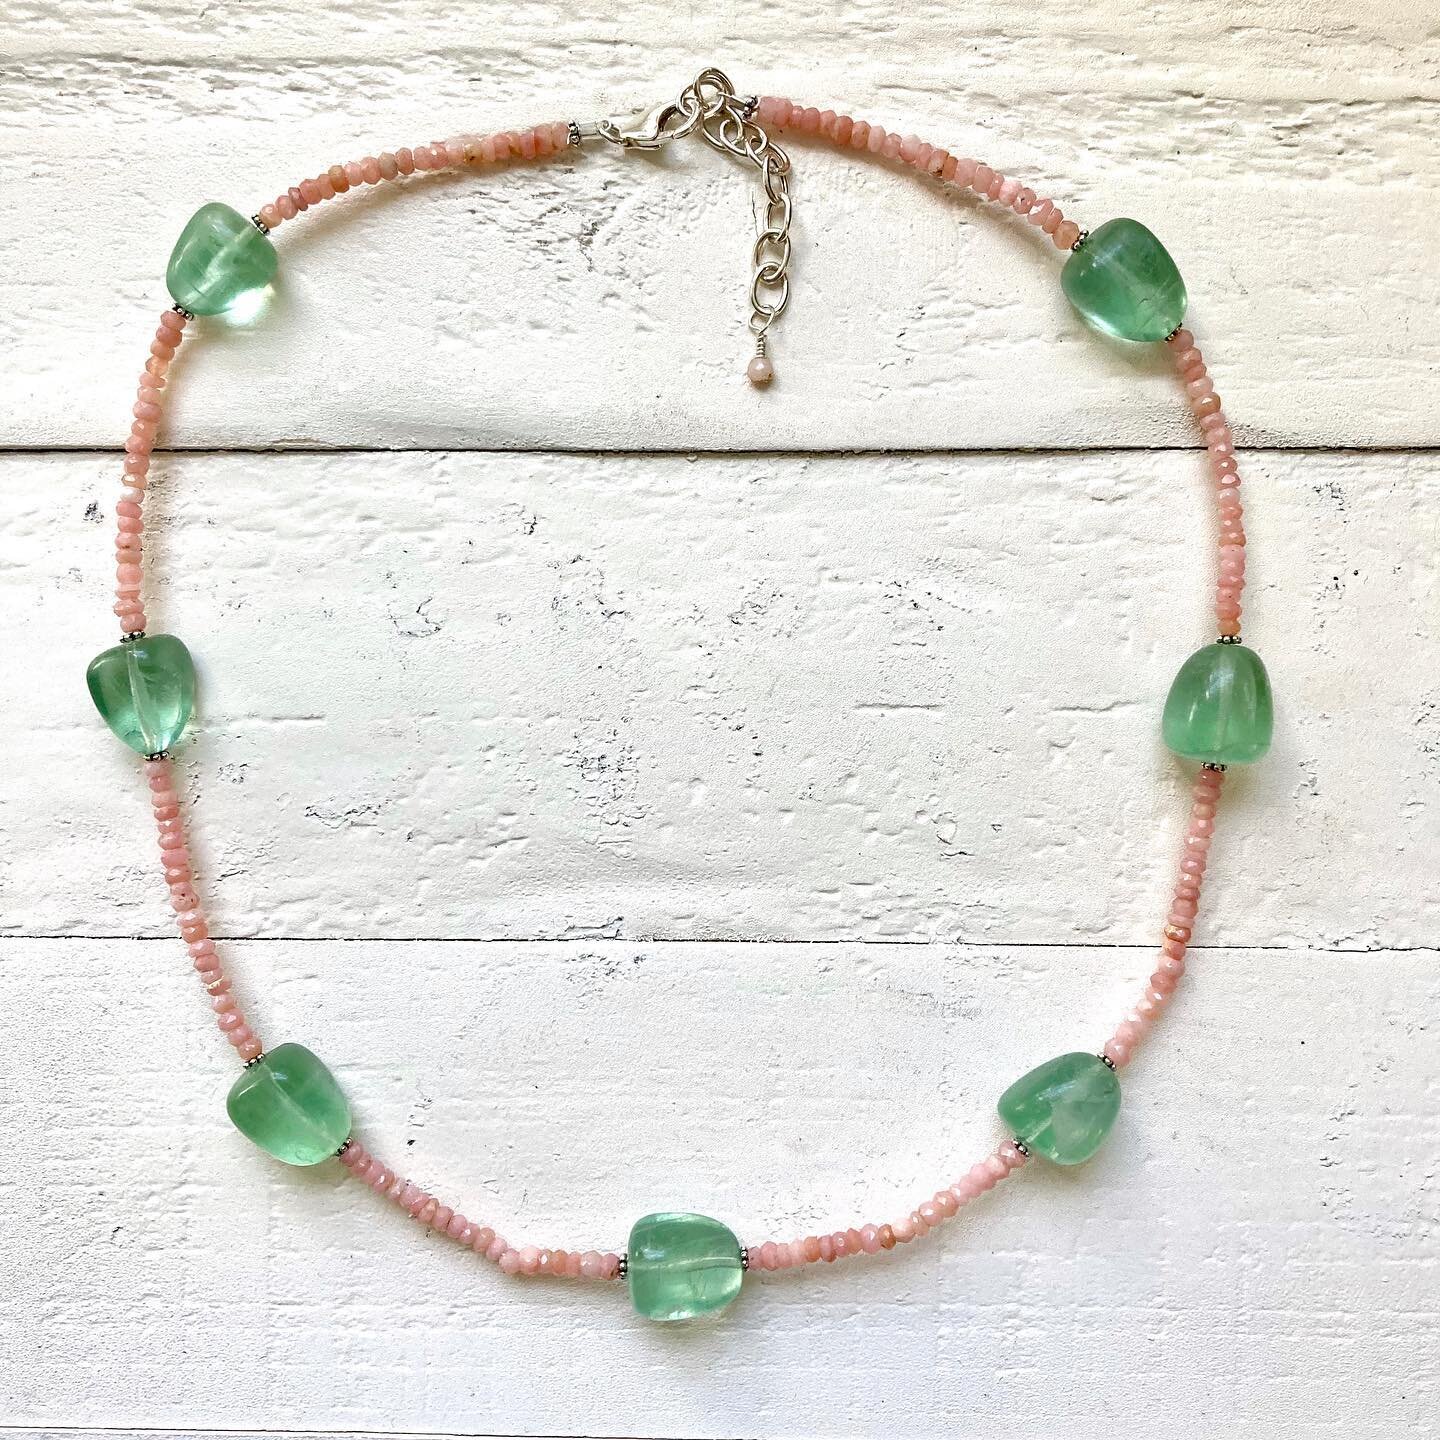 ✨
Summer Street Studio Peony Collection 🌸 🍃 
✨
Fluorite encourages positivity, and is paired here with pink opal, thought to help heal matters of the heart.
✨
Sterling flex wire and clasp. Adjustable 18-20&rdquo;.
✨
Each is handmade and one of a ki